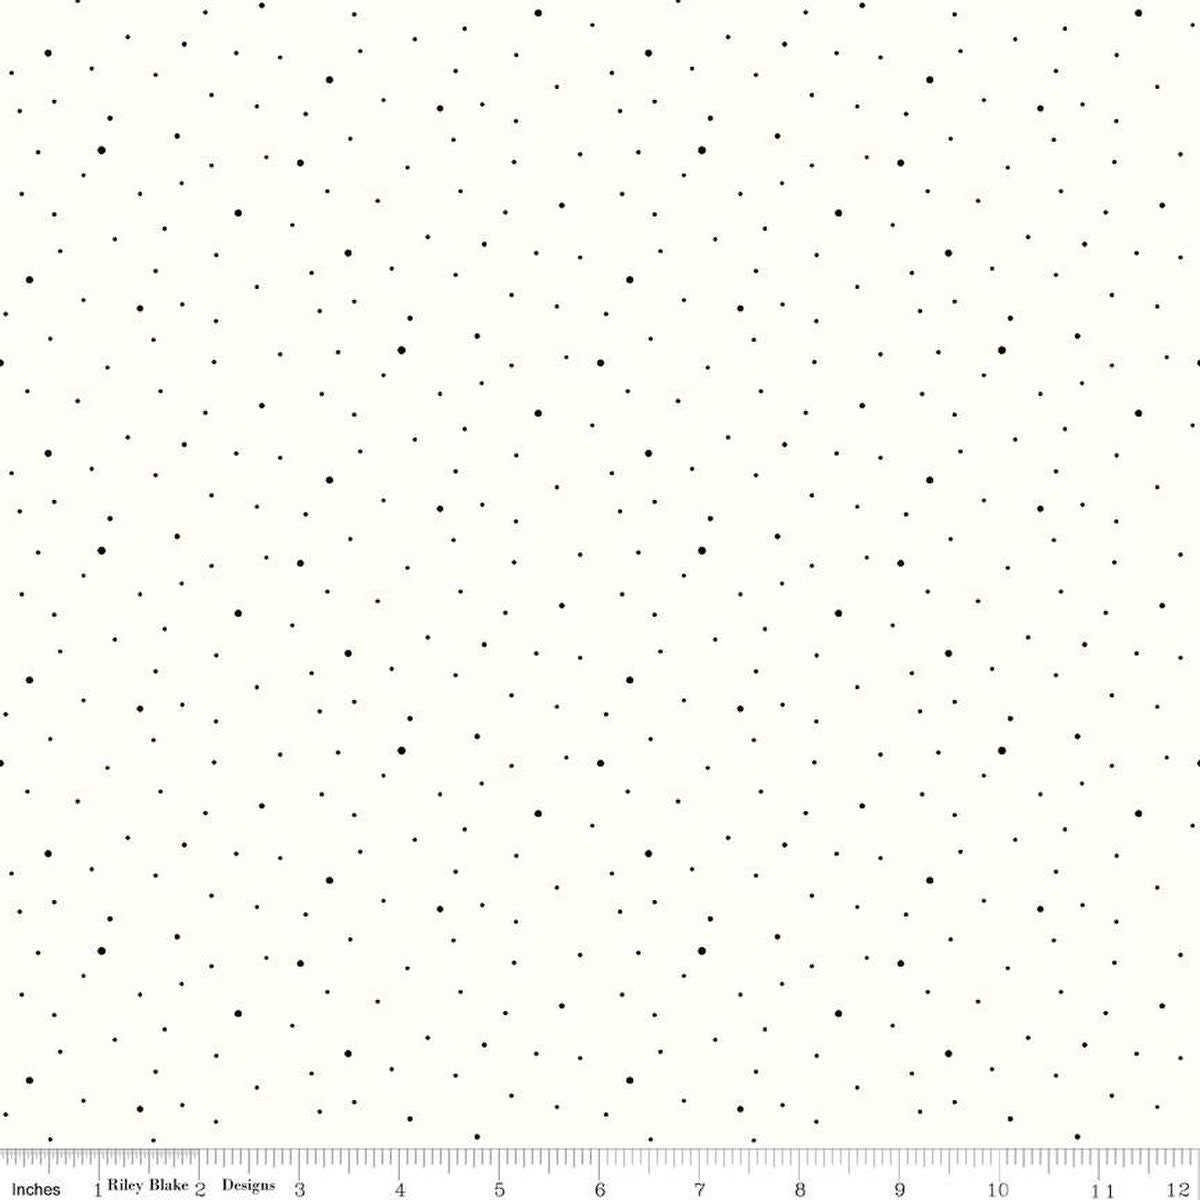 Black and Ivory Pin Dot Paper